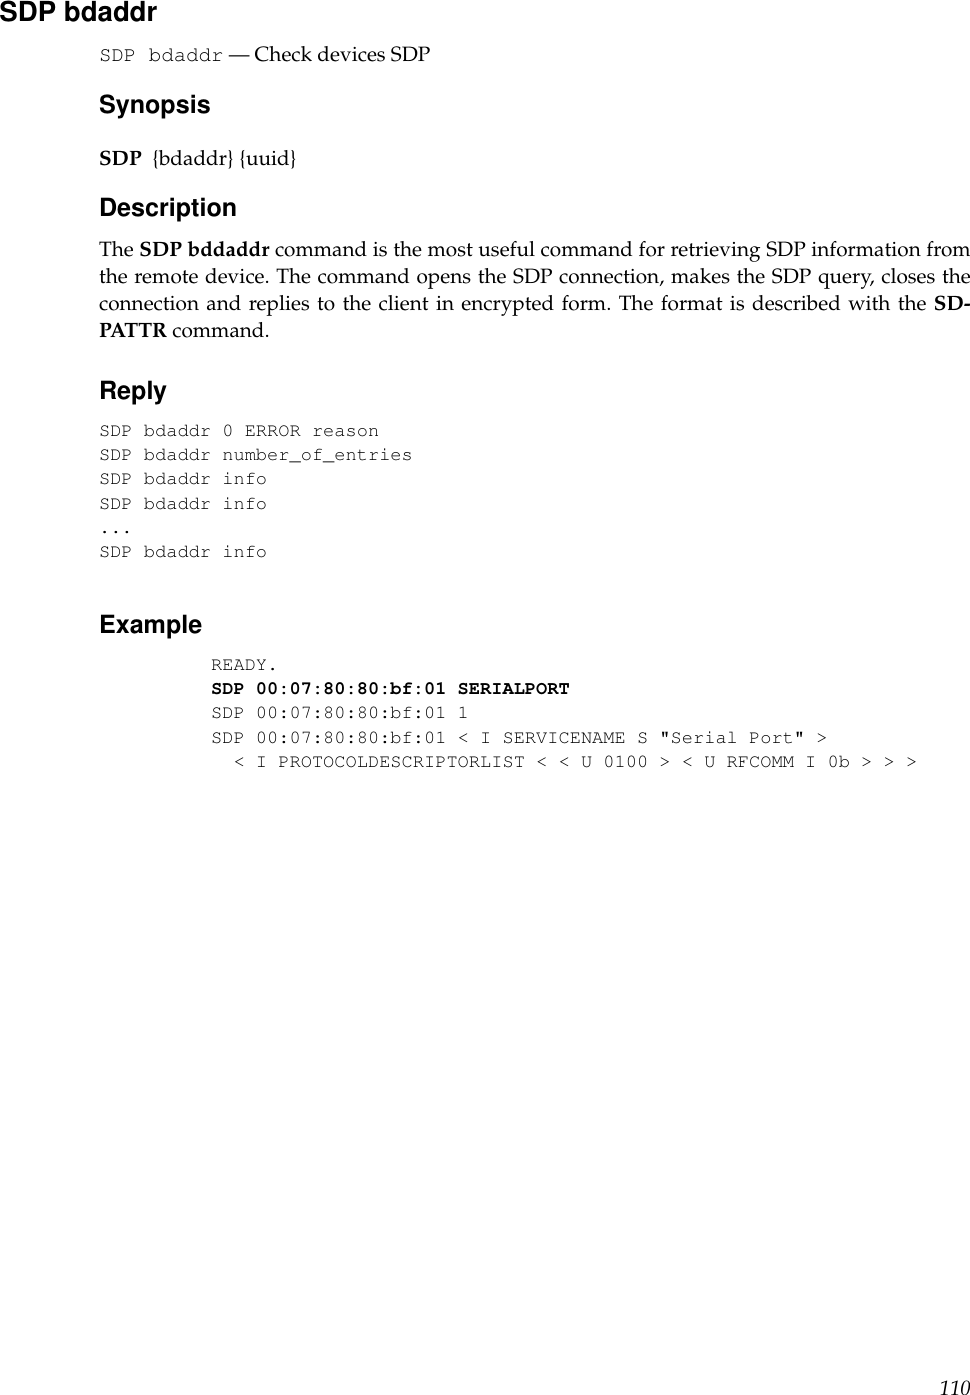 SDP bdaddrSDP bdaddr — Check devices SDPSynopsisSDP {bdaddr} {uuid}DescriptionThe SDP bddaddr command is the most useful command for retrieving SDP information fromthe remote device. The command opens the SDP connection, makes the SDP query, closes theconnection and replies to the client in encrypted form. The format is described with the SD-PATTR command.ReplySDP bdaddr 0 ERROR reasonSDP bdaddr number_of_entriesSDP bdaddr infoSDP bdaddr info...SDP bdaddr infoExampleREADY.SDP 00:07:80:80:bf:01 SERIALPORTSDP 00:07:80:80:bf:01 1SDP 00:07:80:80:bf:01 &lt; I SERVICENAME S &quot;Serial Port&quot; &gt;&lt; I PROTOCOLDESCRIPTORLIST &lt; &lt; U 0100 &gt; &lt; U RFCOMM I 0b &gt; &gt; &gt;110